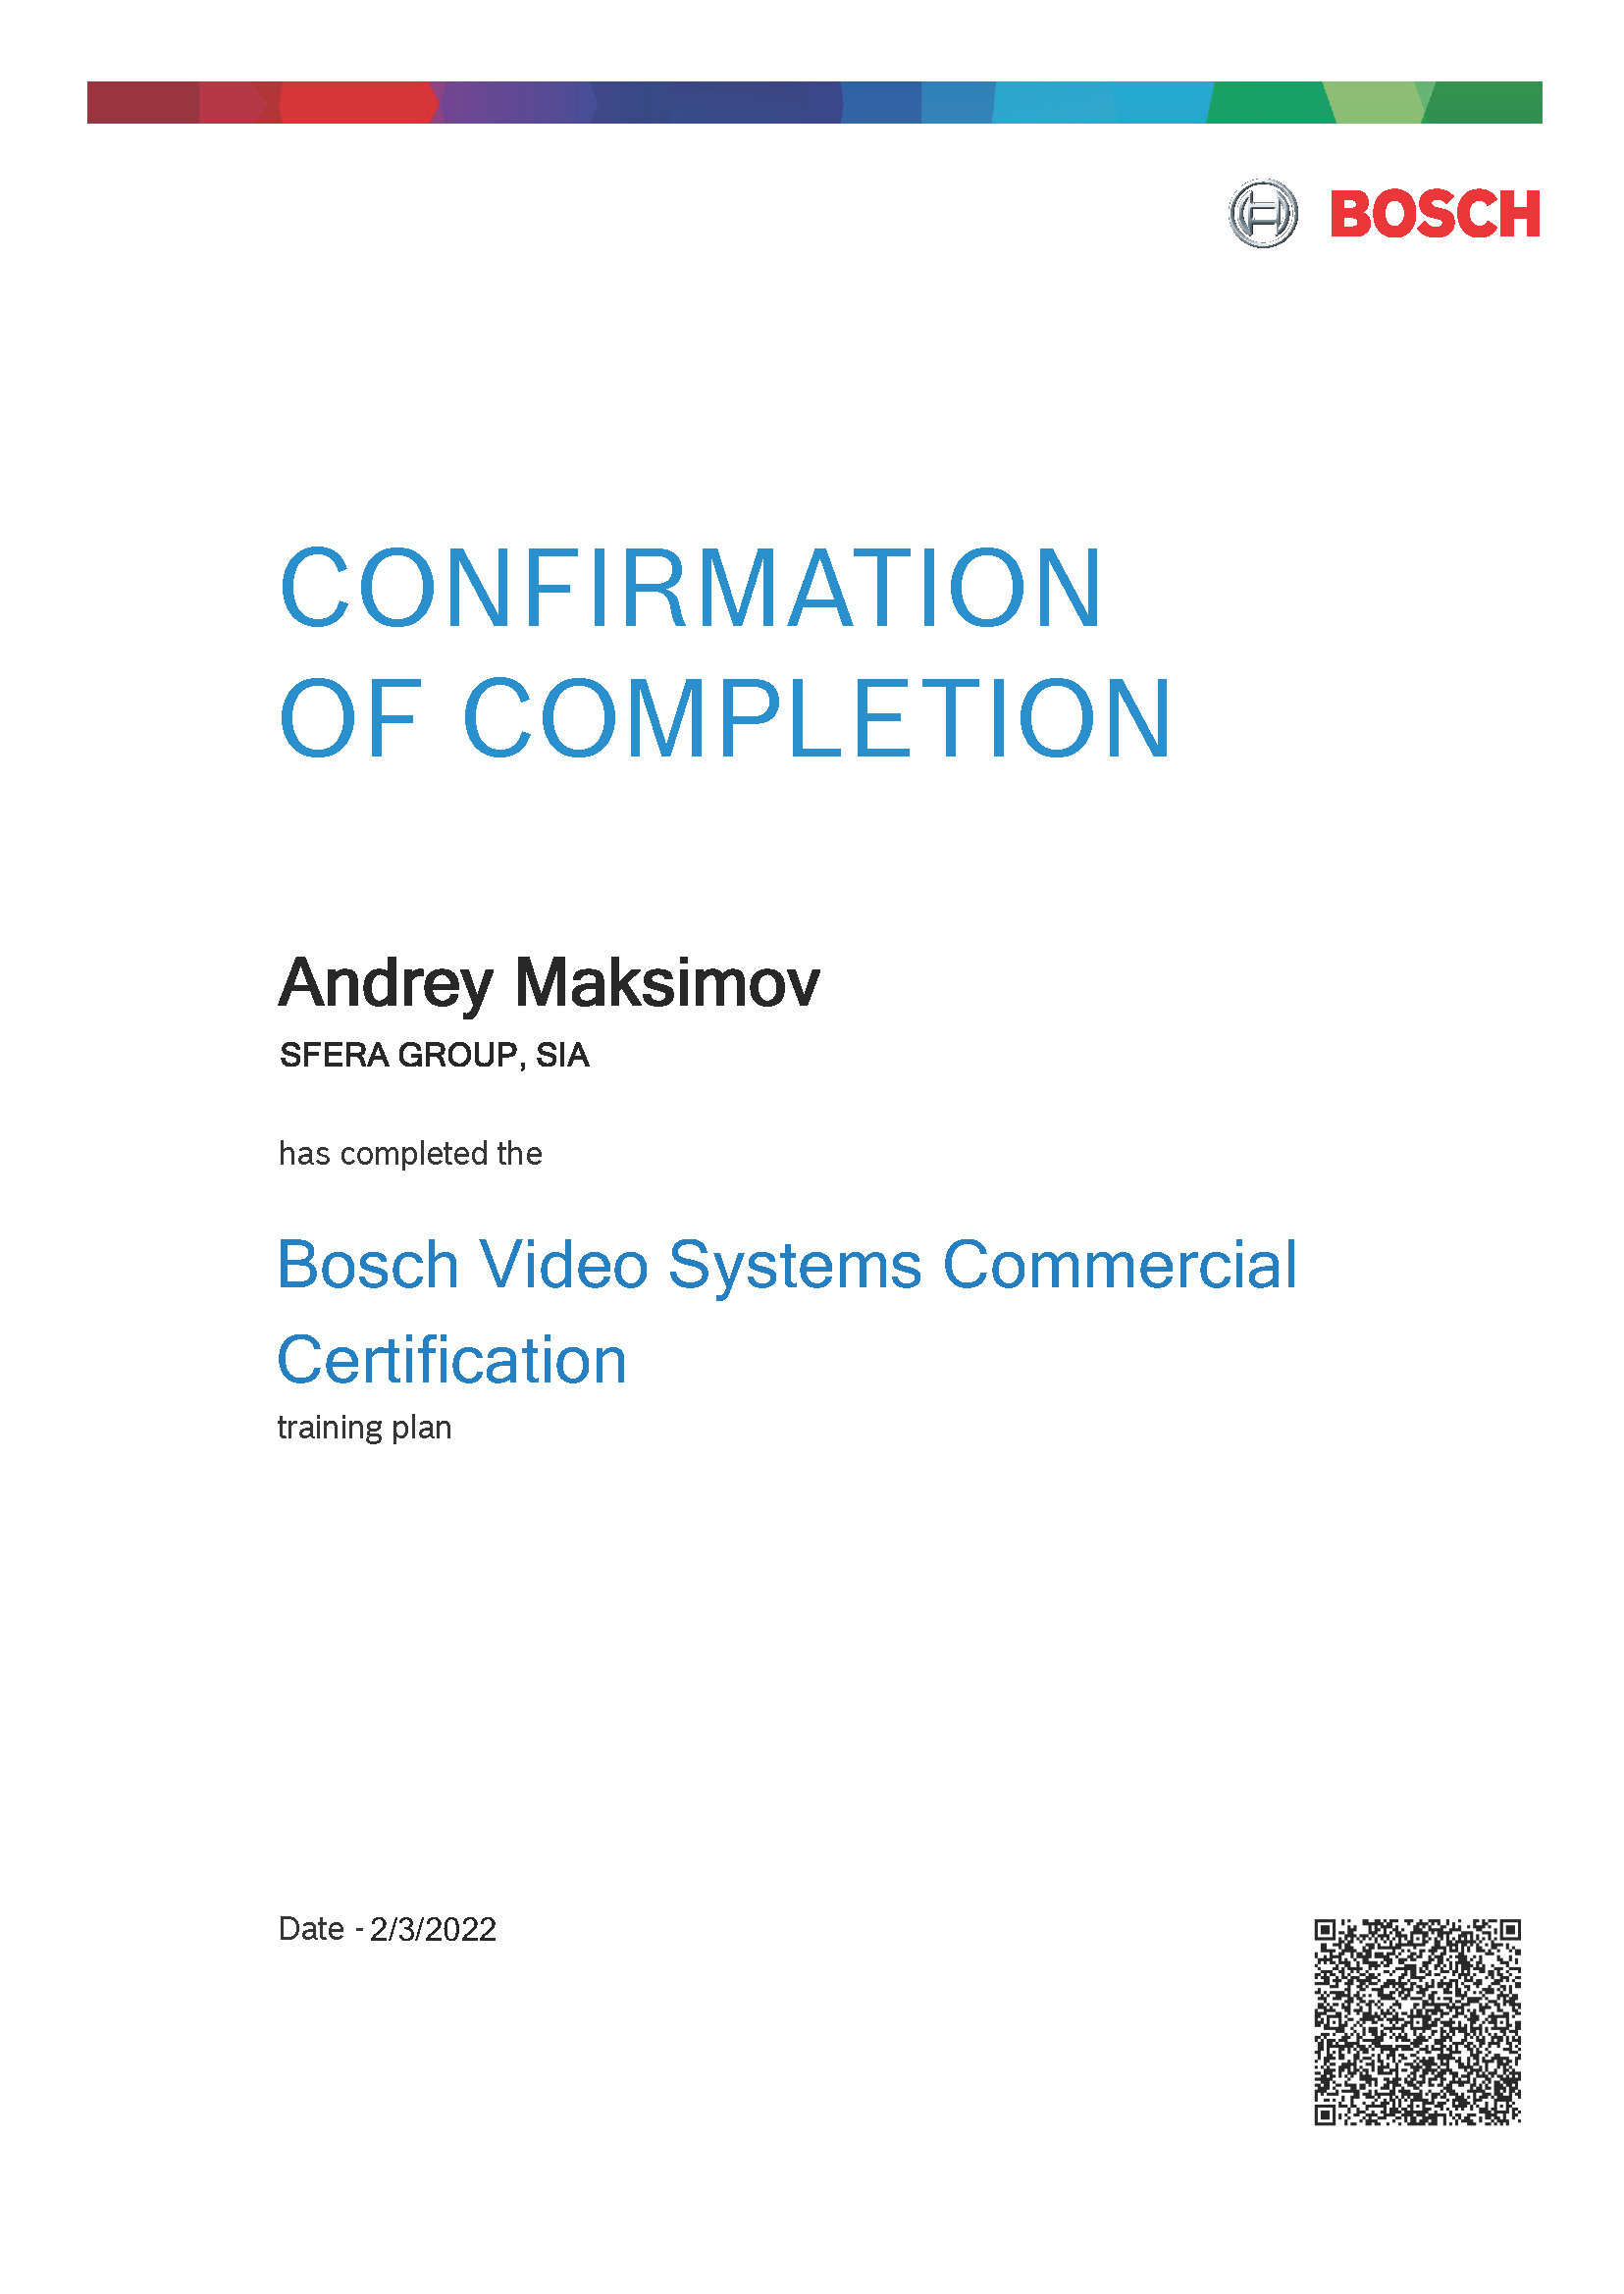 Bosch Video Systems Commercial Certification